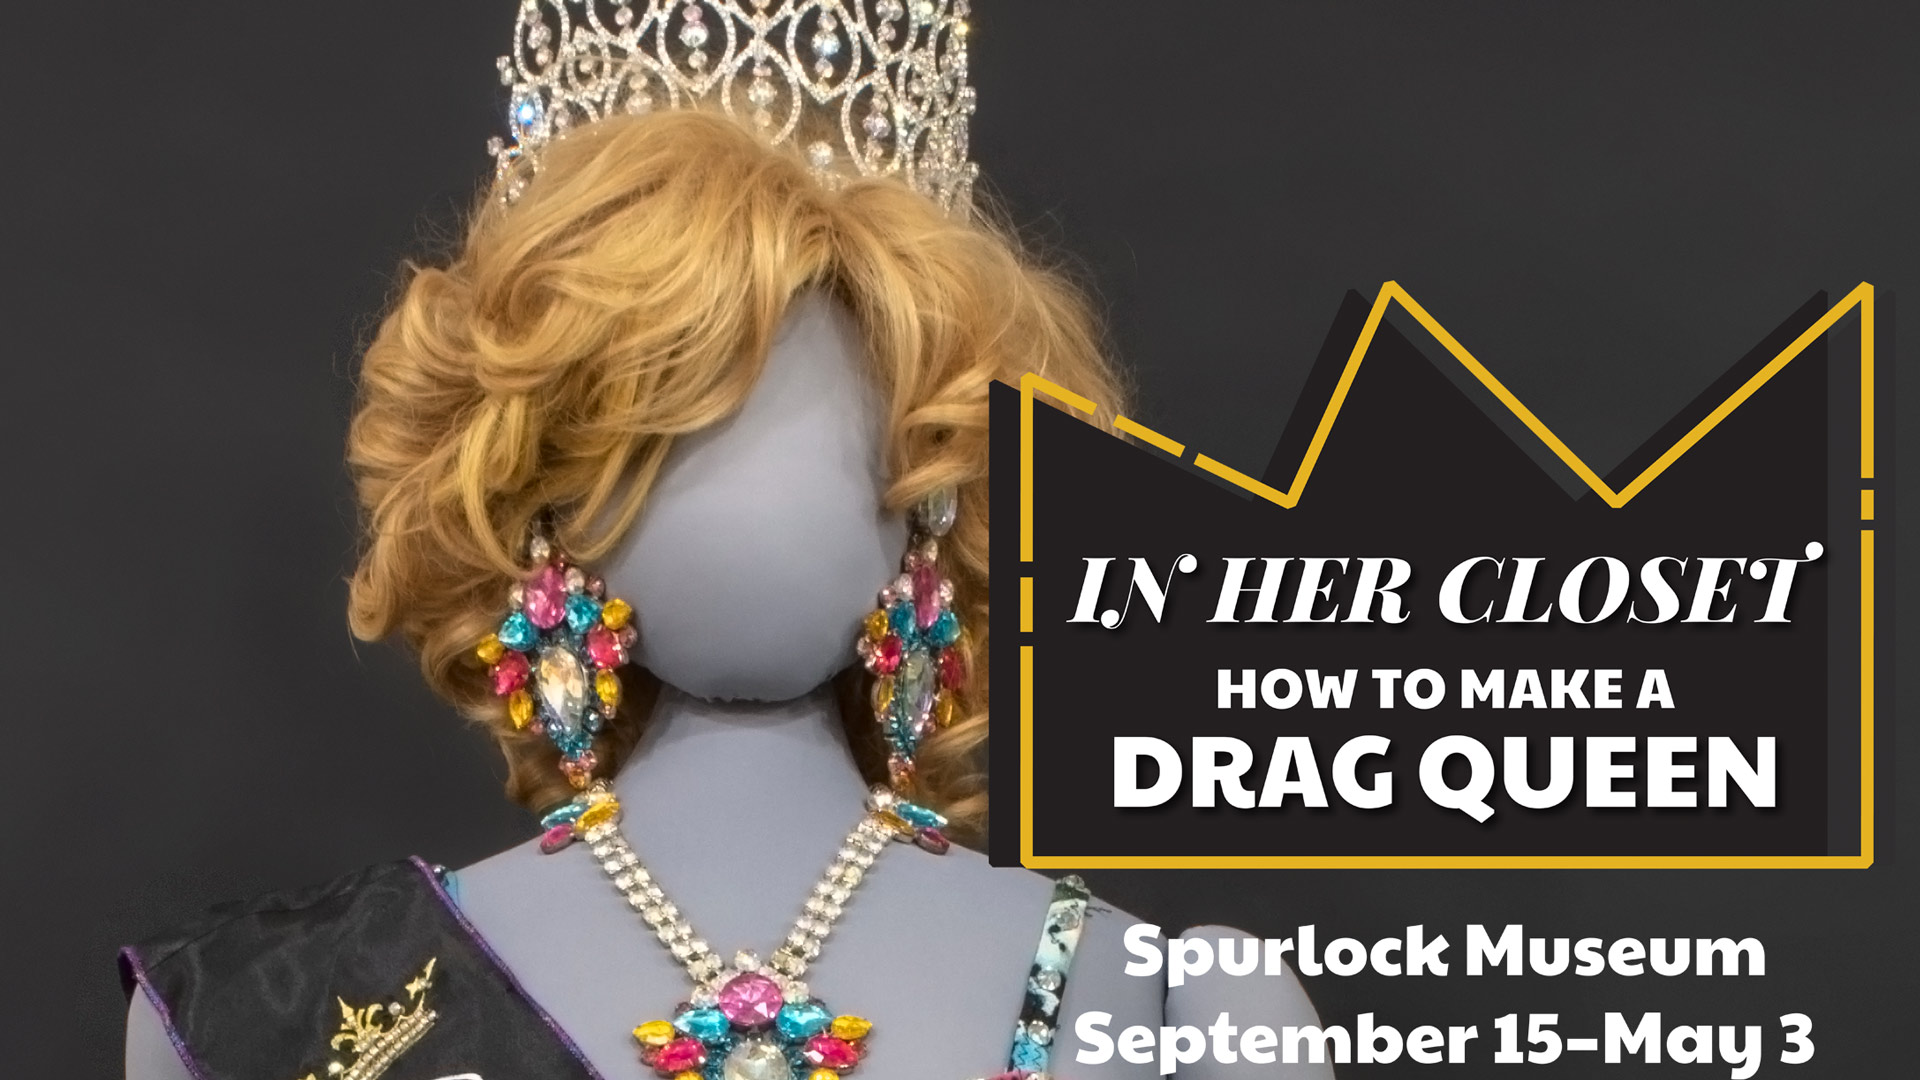 Mannequin from In Her Closet How to make a Drag Queen exhibit adorned with jewlery superimposed with exhibit logo, location, and dates